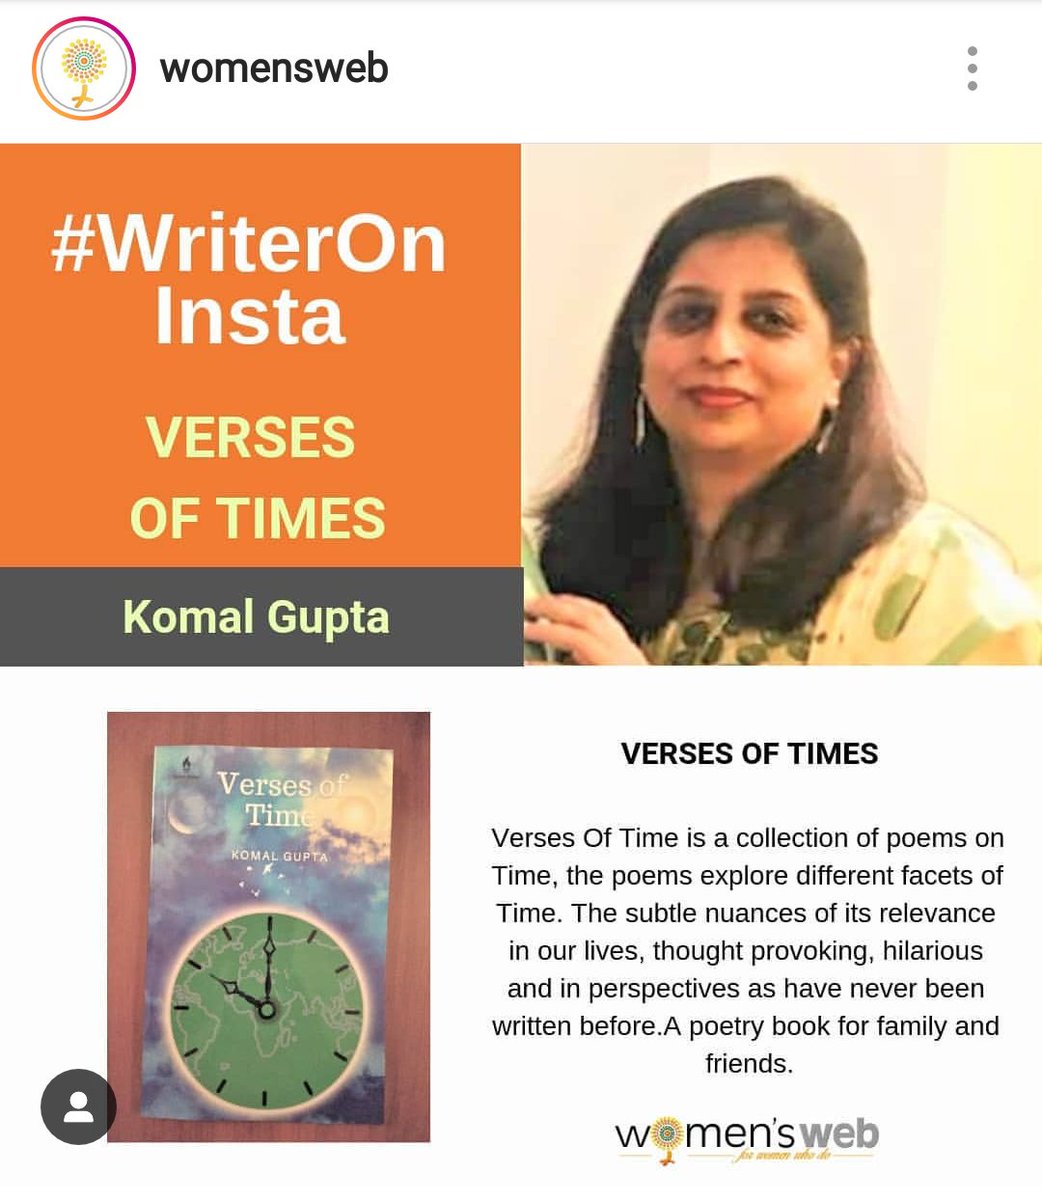 Featured on Instagram by @womensweb in the series #WriterOnInsta, showcasing women writers.
Happy, honoured and humbled!
Thank you so much!

#womensweb #india #tejaswiniaura #womenwriters #upcomingwriters #womenempowerment #poetry #englishpoetry